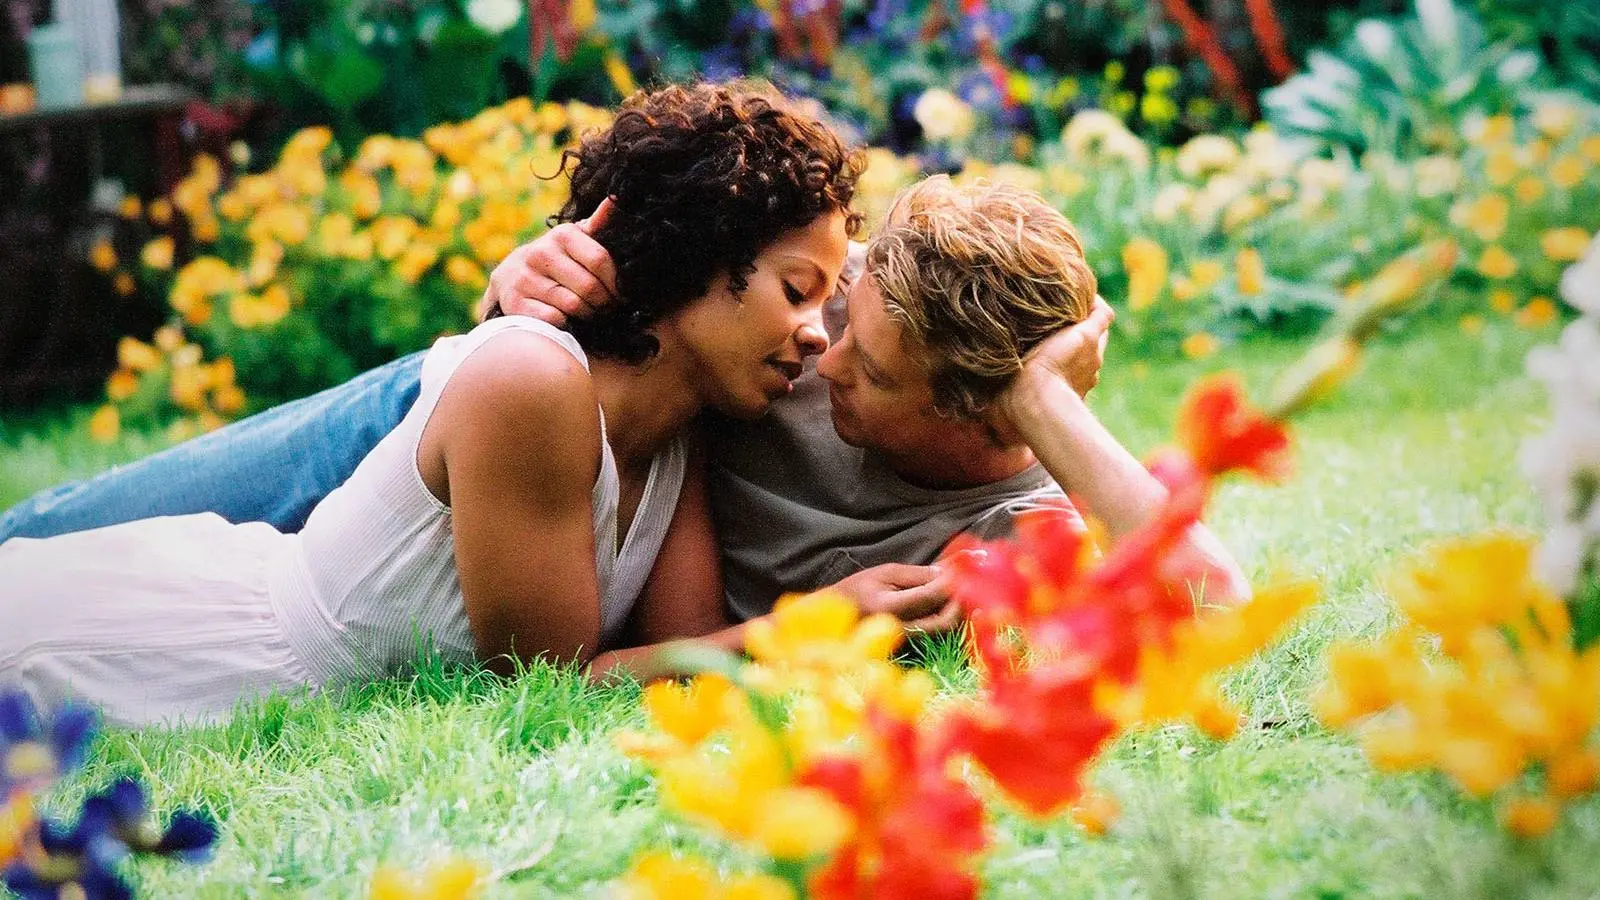 Sanaa Lathan as Kenya Denise McQueen and Simon Baker as Brian Kelly in 'Something New' kissing in the garden.